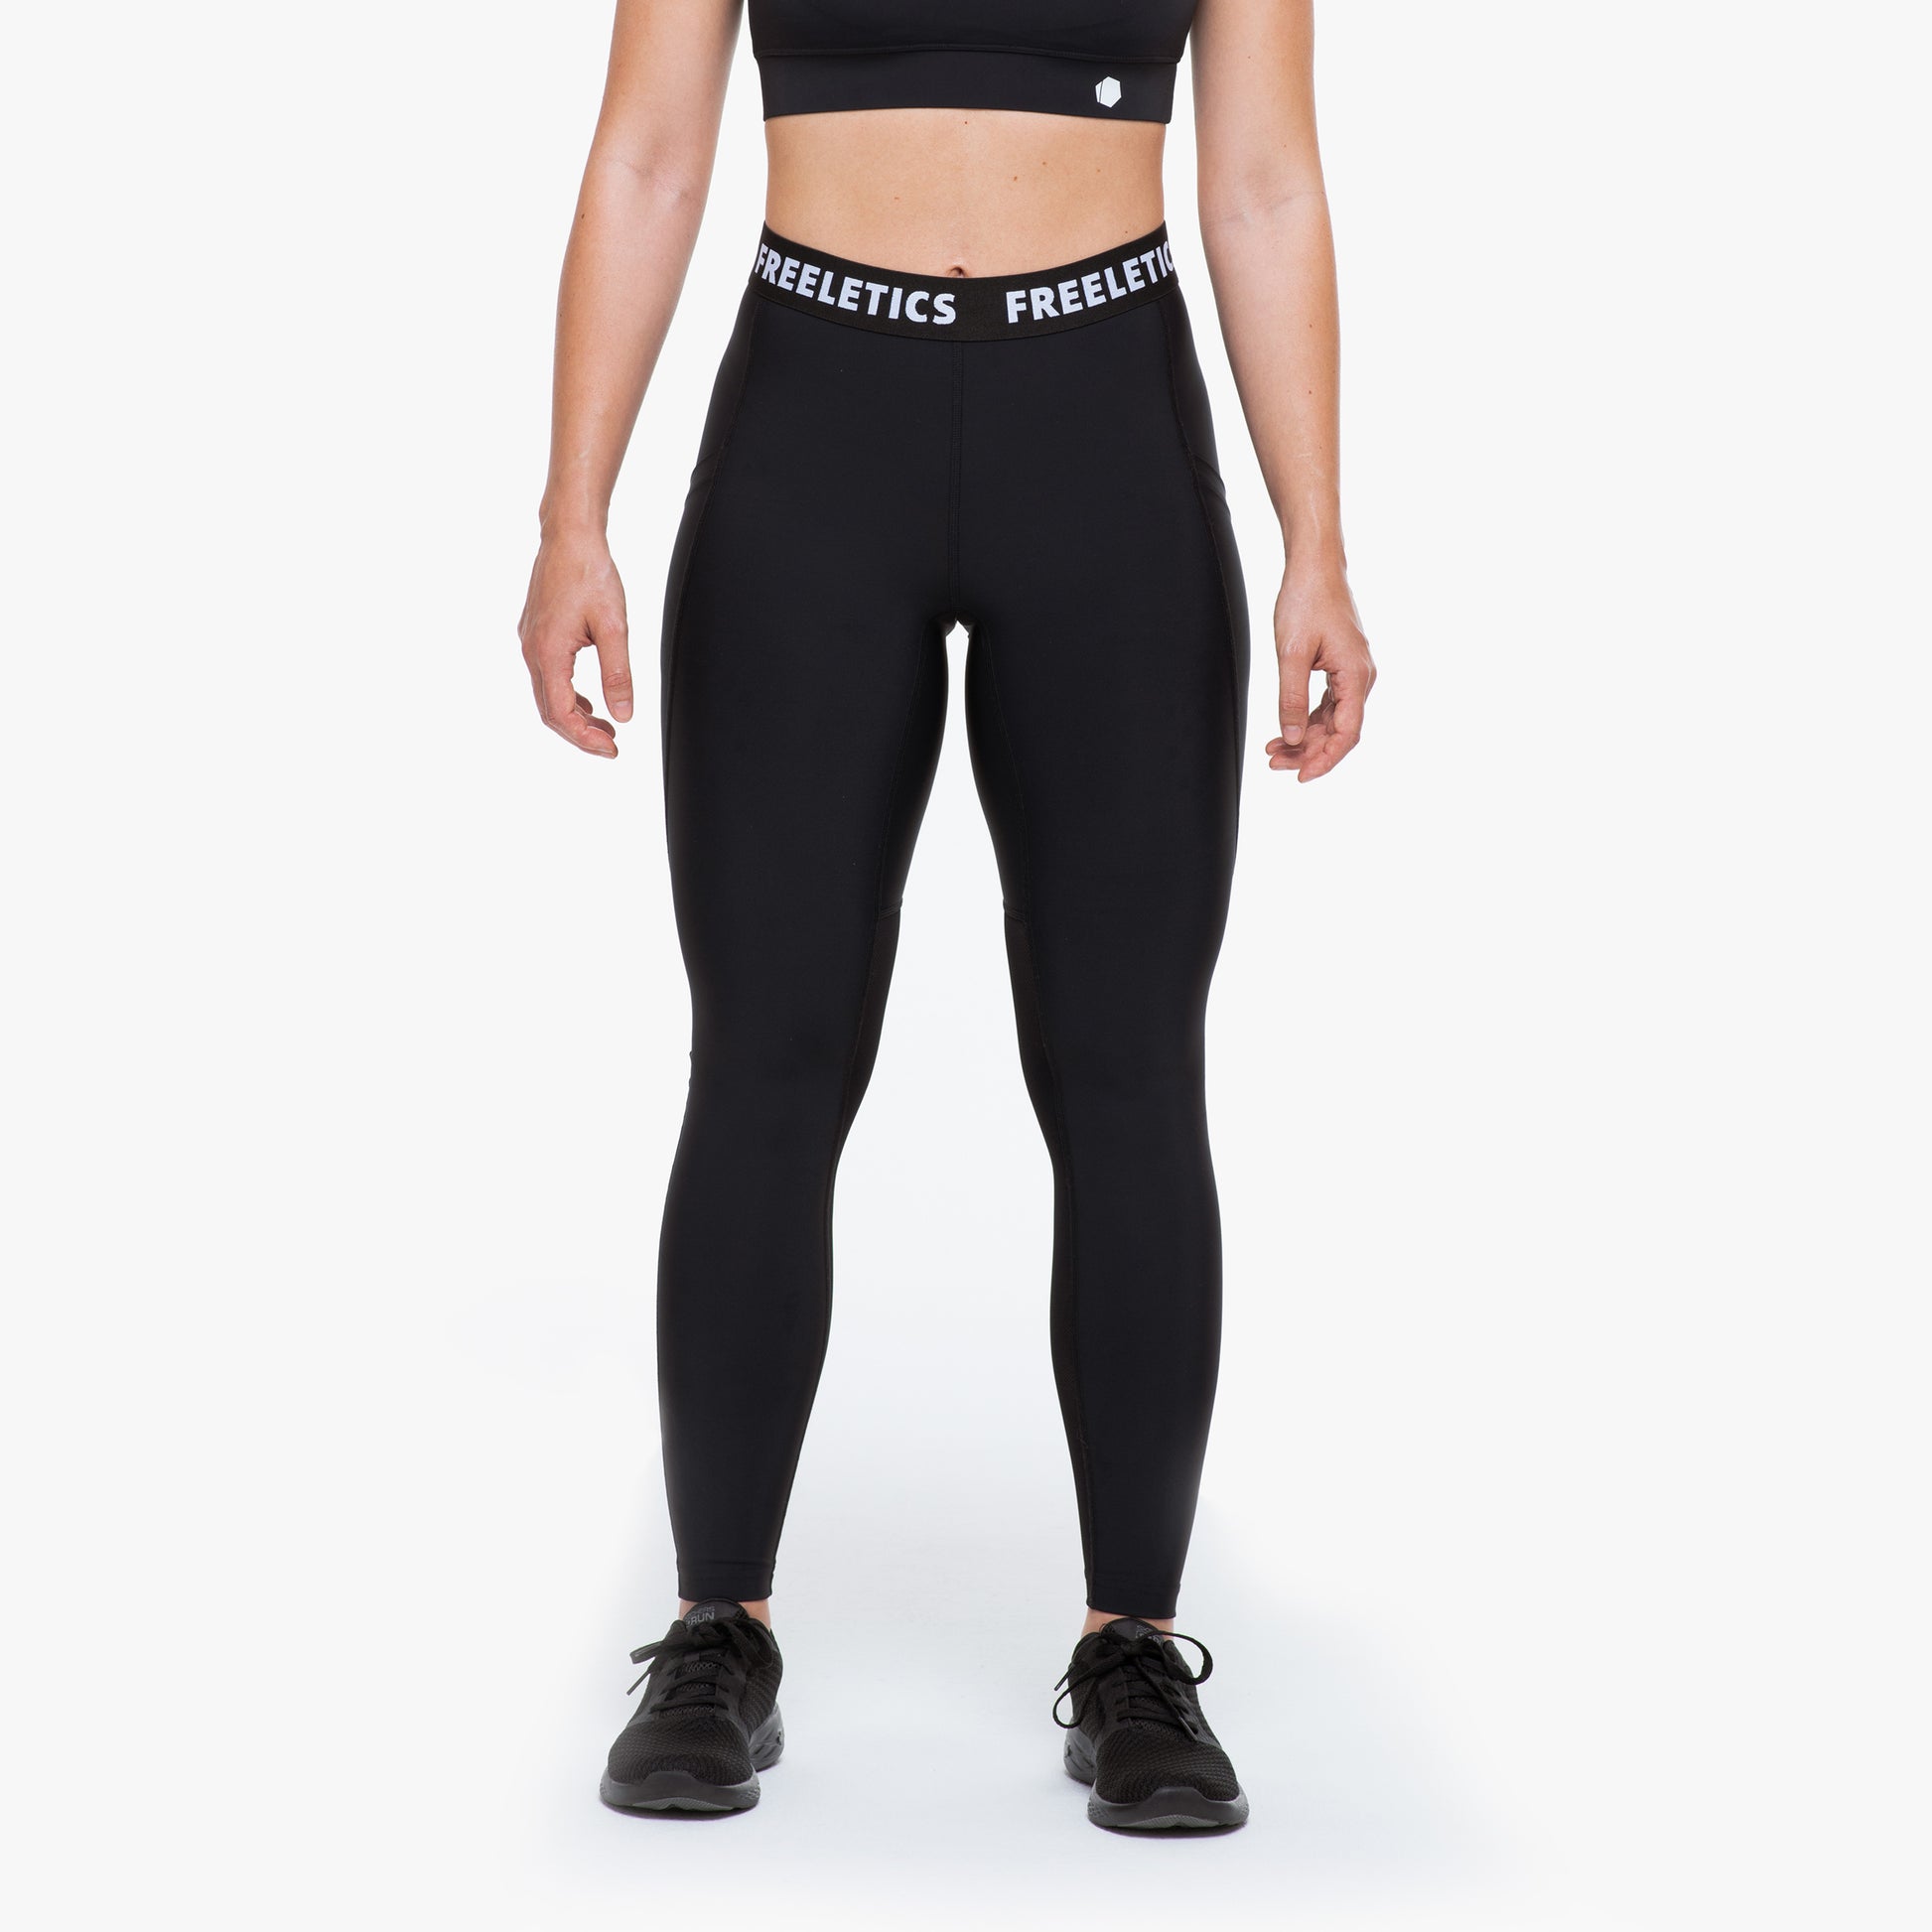 Tights & Leggings, Buy training clothes online at